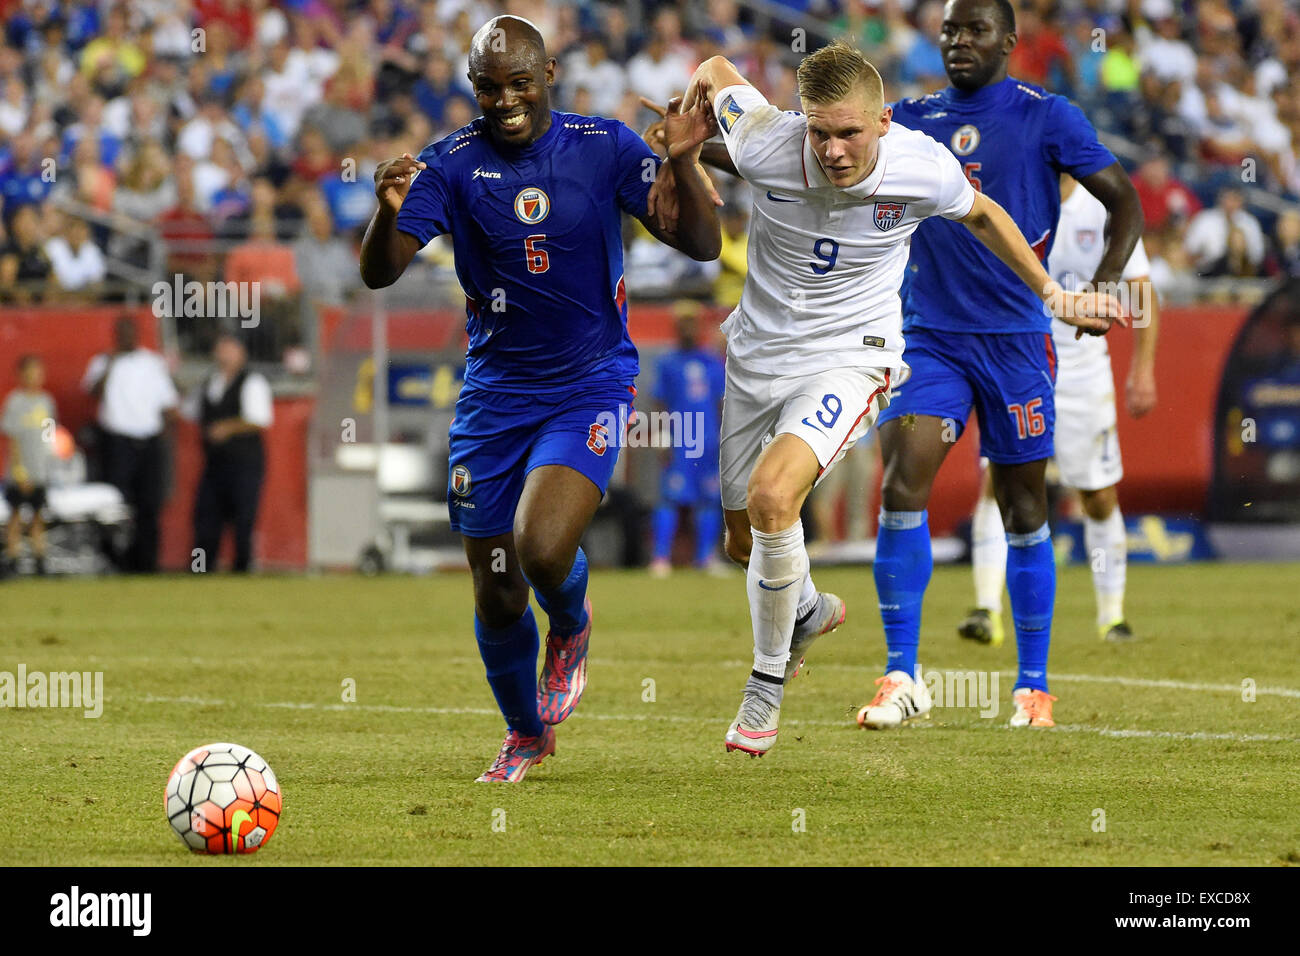 Foxborough, Massachusetts, USA. 10th July, 2015. United States forward Aron Johannsson (9) and Haiti defender Frantz Bertin (6) battle their way to the ball during the CONCACAF Gold Cup group stage match between USA and Haiti held at Gillette Stadium, in Foxborough Massachusetts. USA defeated Haiti 1-0. Eric Canha/CSM/Alamy Live News Stock Photo